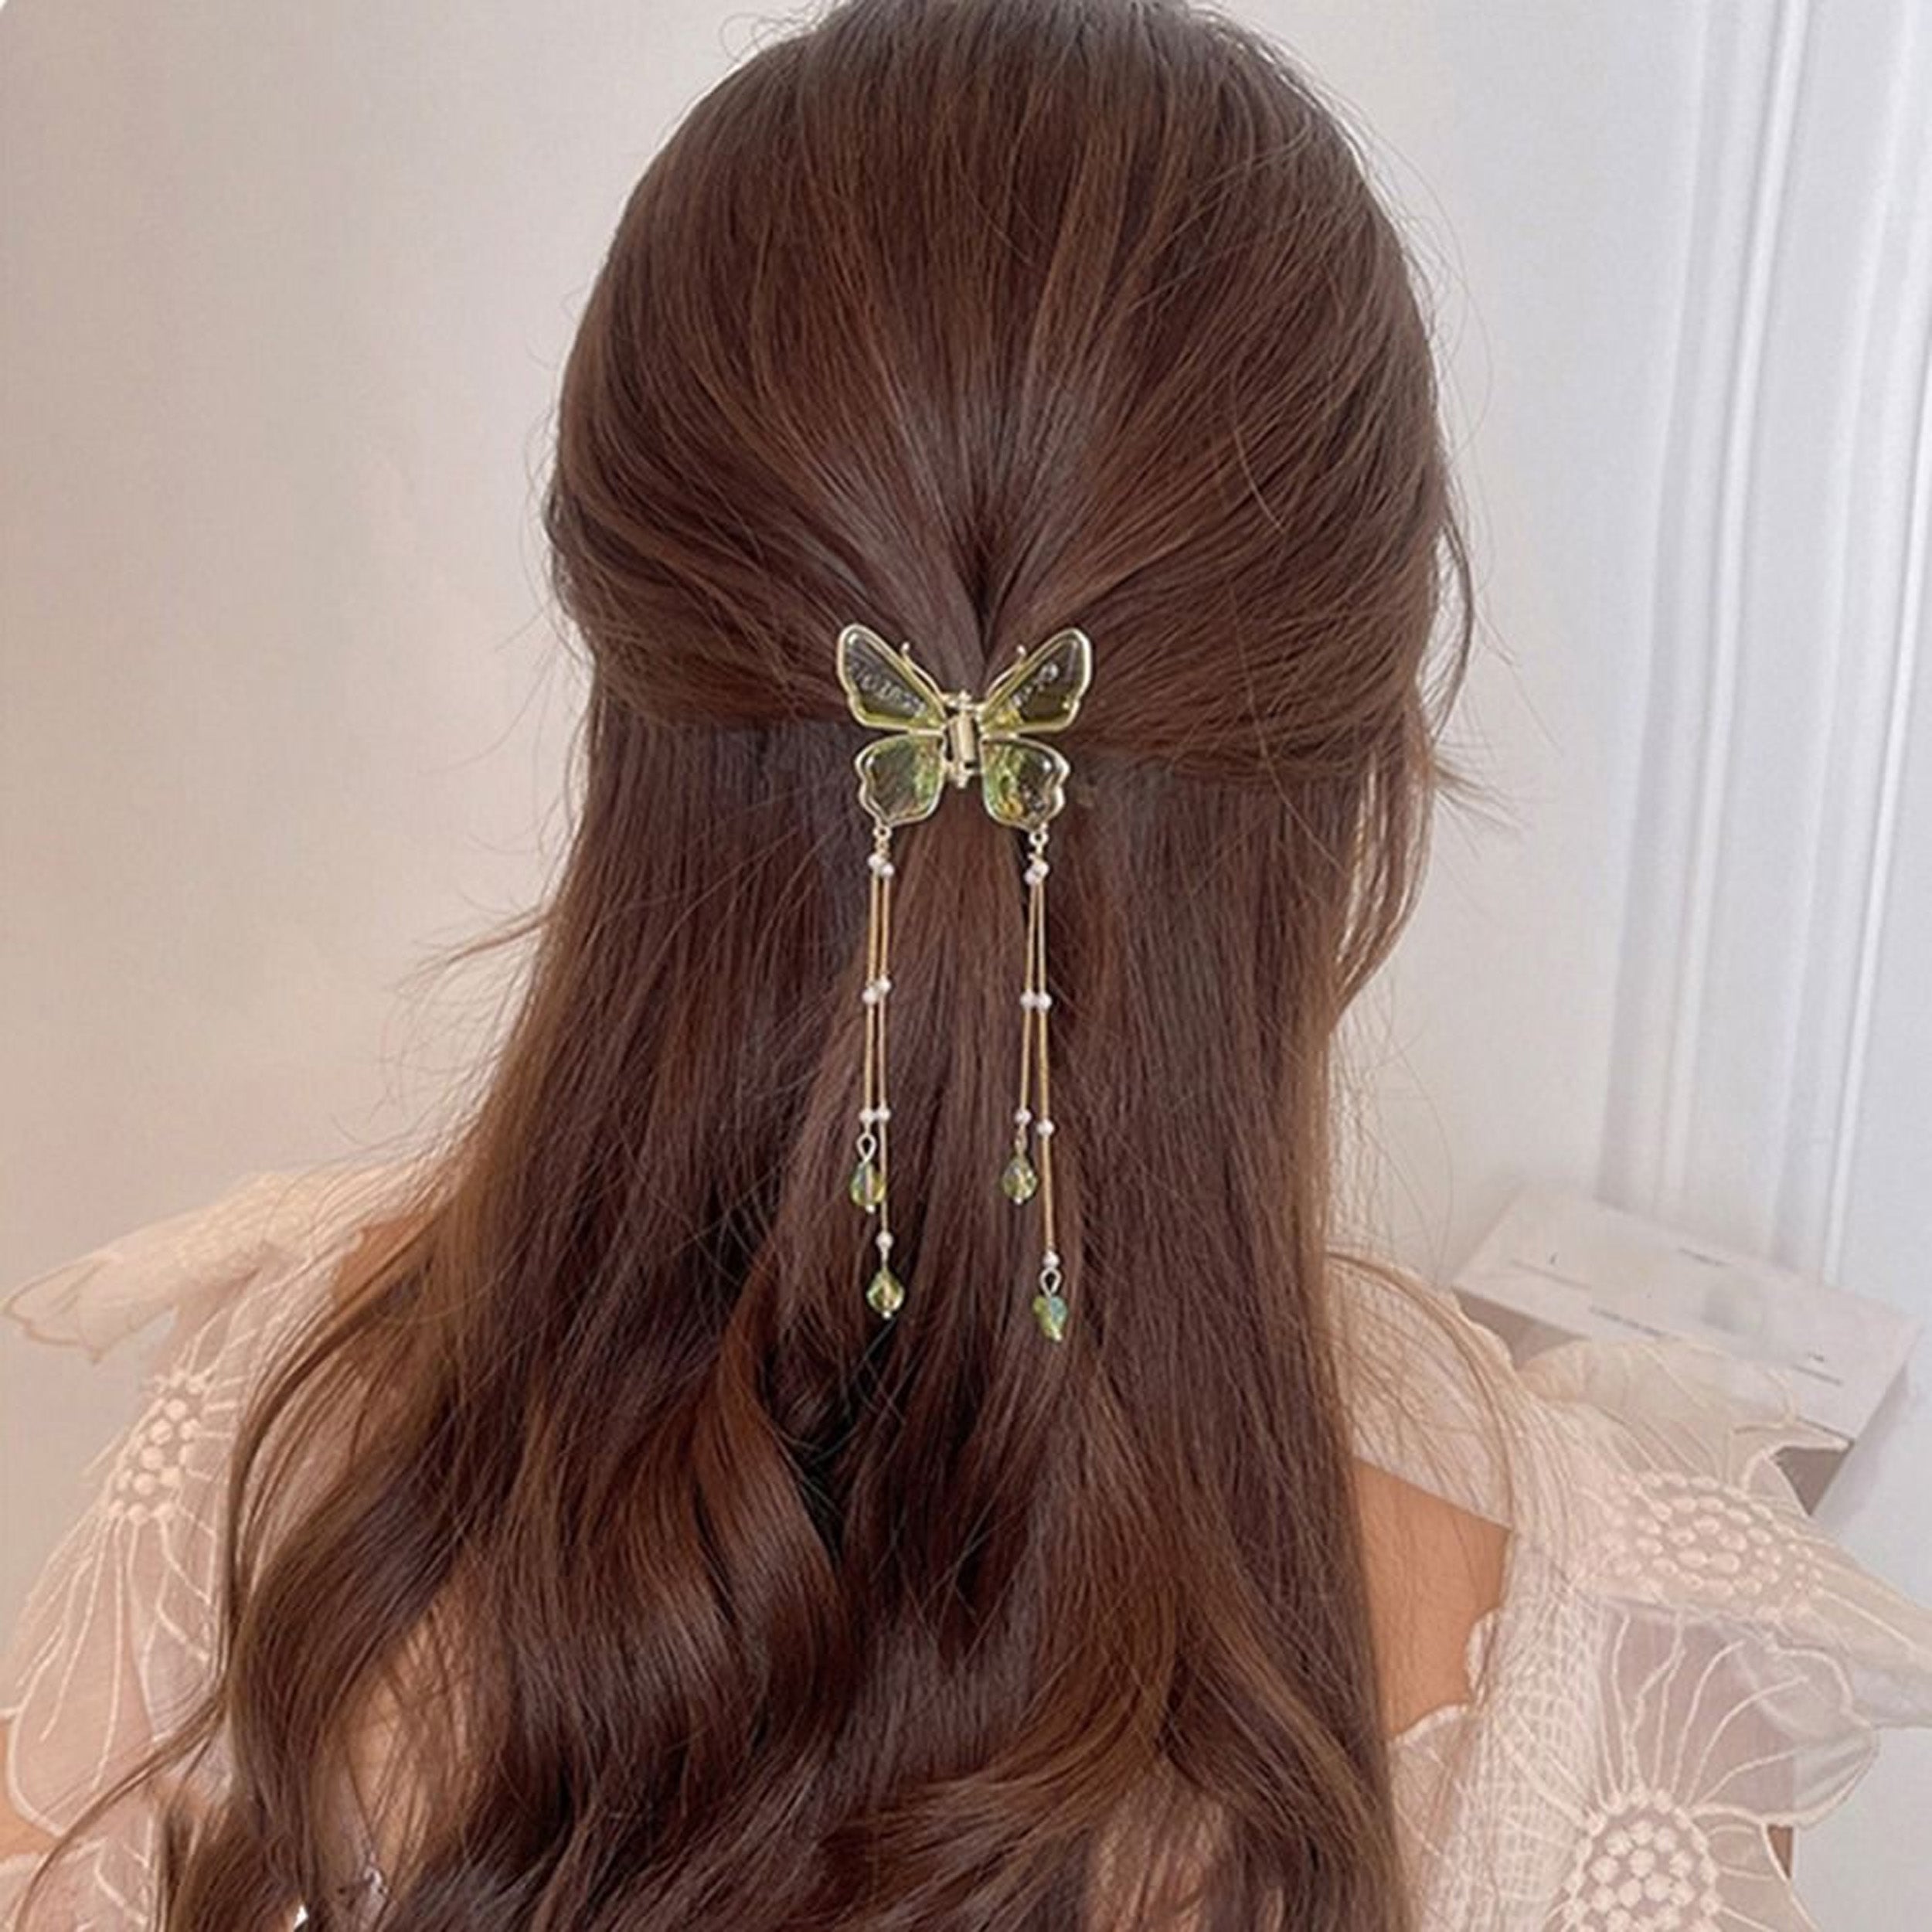 New Fancy Metal Butterfly Style Non-Slip Hair Claw Clip Accessories For Women's & Girls